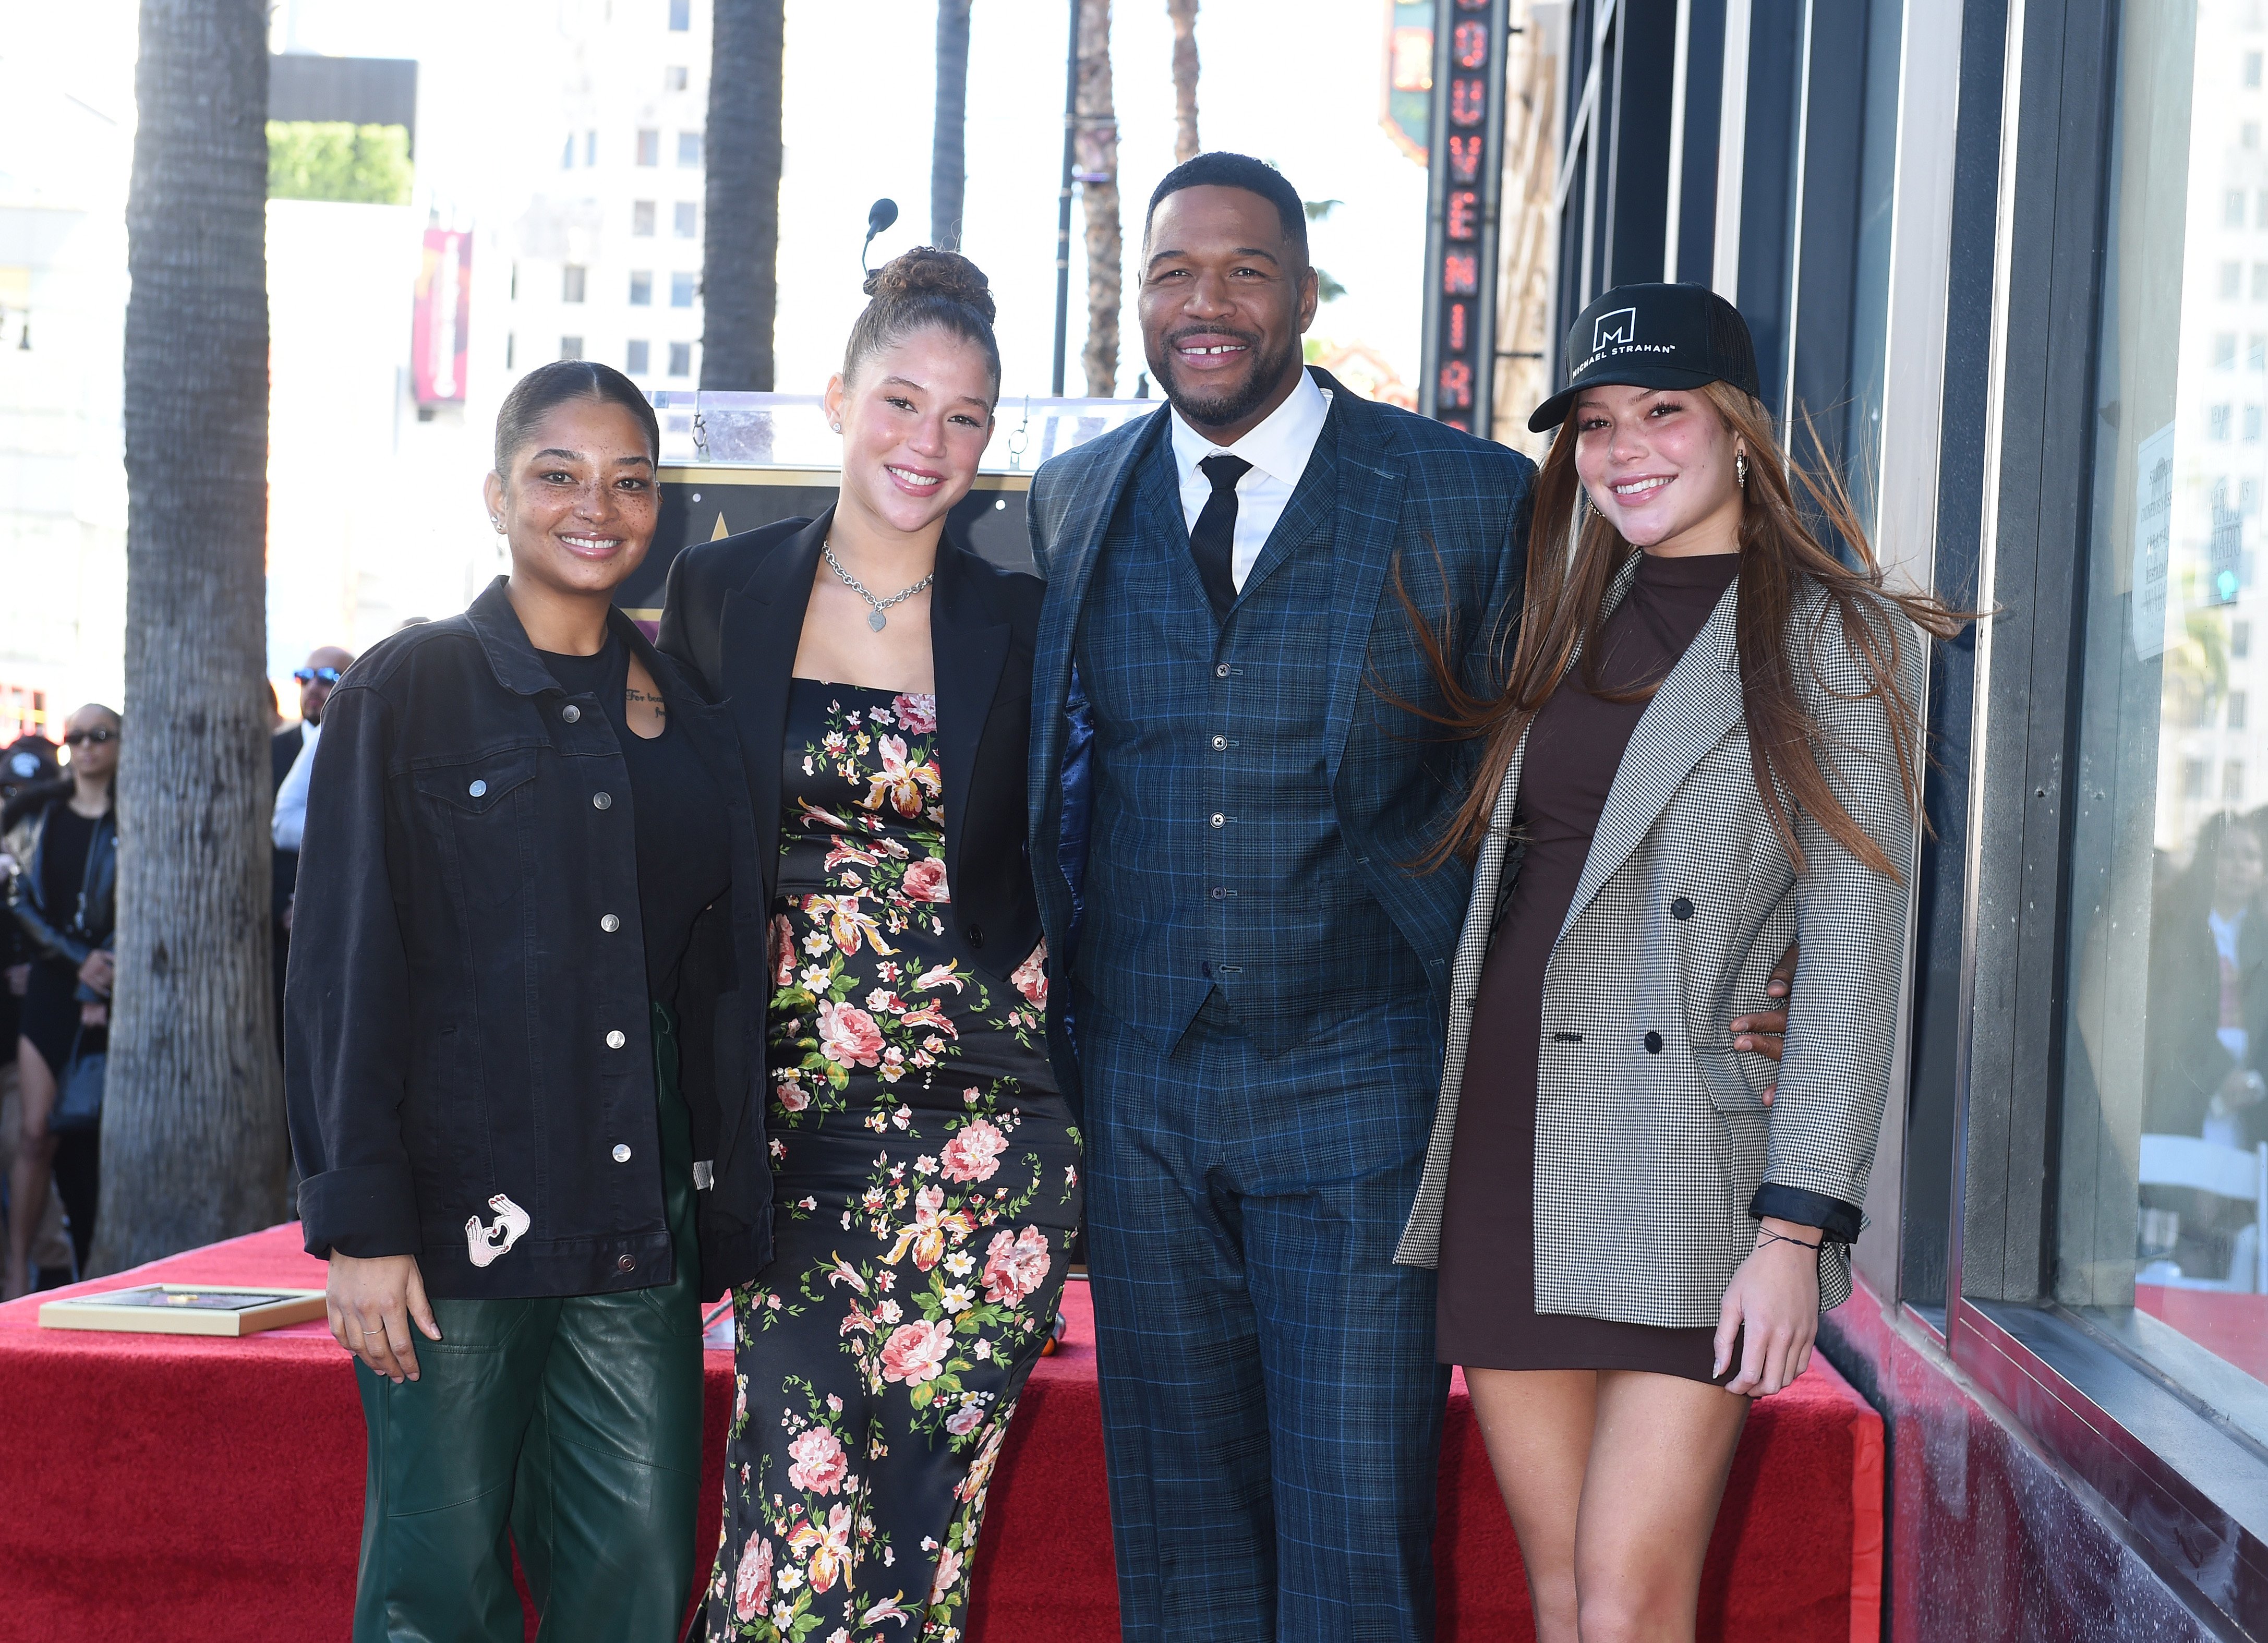 Tanita, Isabella, Michael and Sophia Strahan at the star ceremony where Michael is honored with the star on the Hollywood Walk of Fame on January 23, 2023, in Los Angeles, California | Source: Getty Images